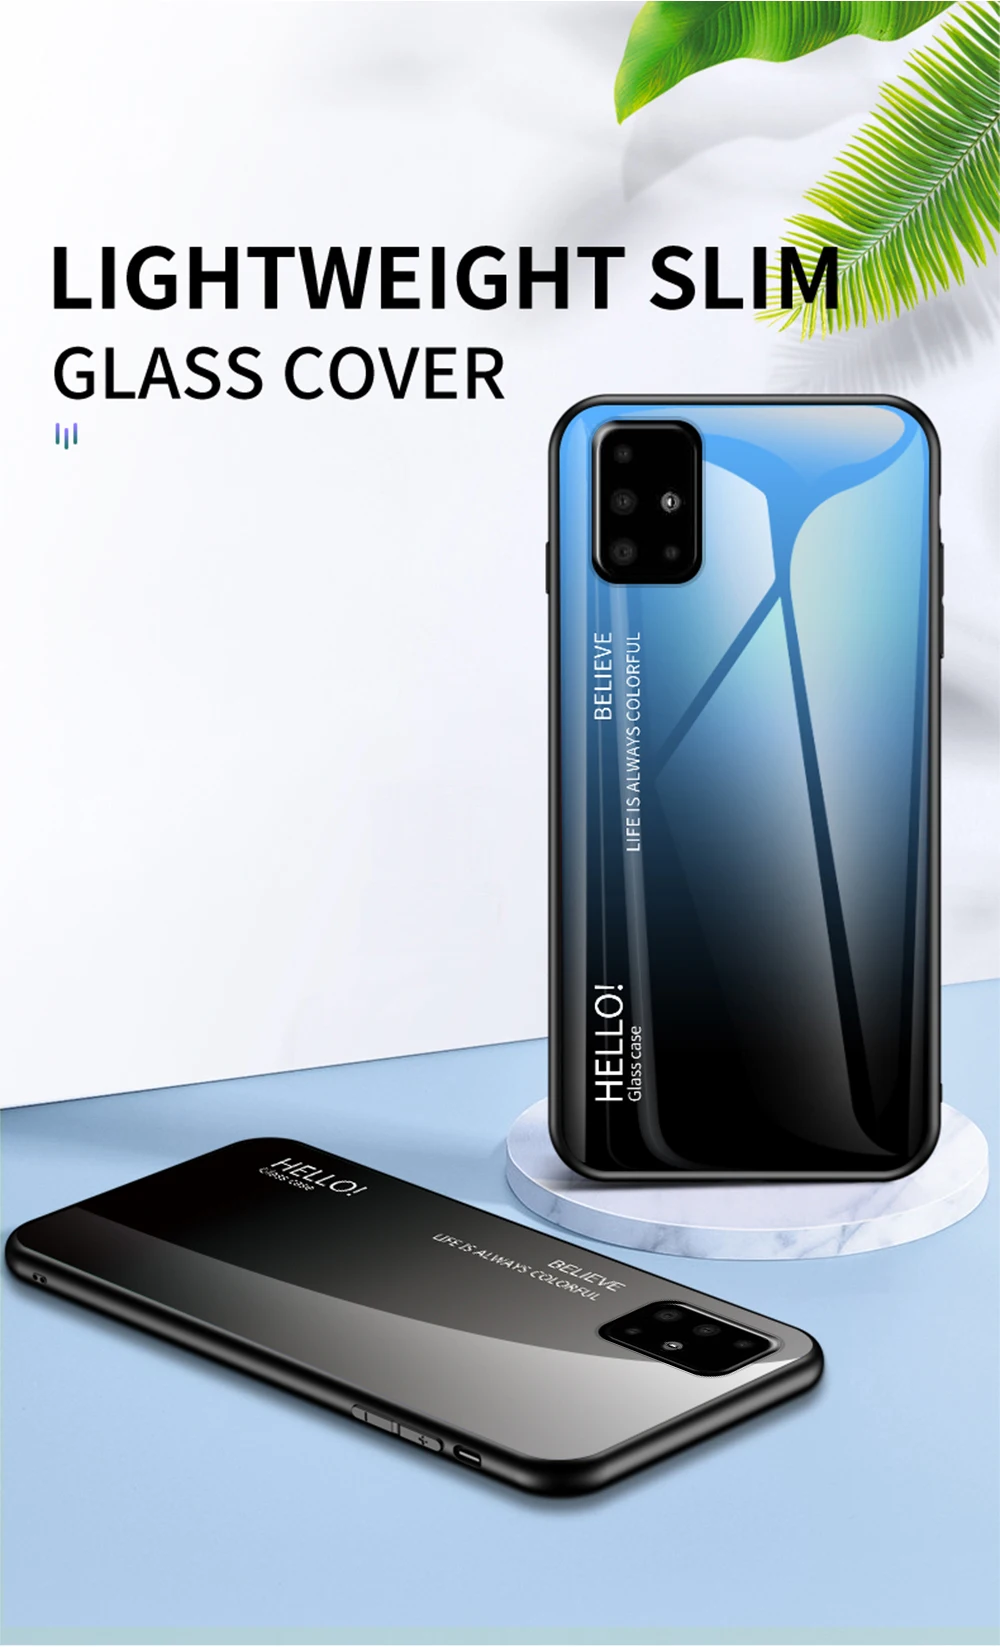 A52 Case ZROTEVE Gradient Tempered Glass Cover For Samsung Galaxy A52s A72 A12 A22 A32 M52 M53 M54 A13 A14 A34 A54 A53 A73 Cases- S49fd686fca204afb9315d9146c80d5a09